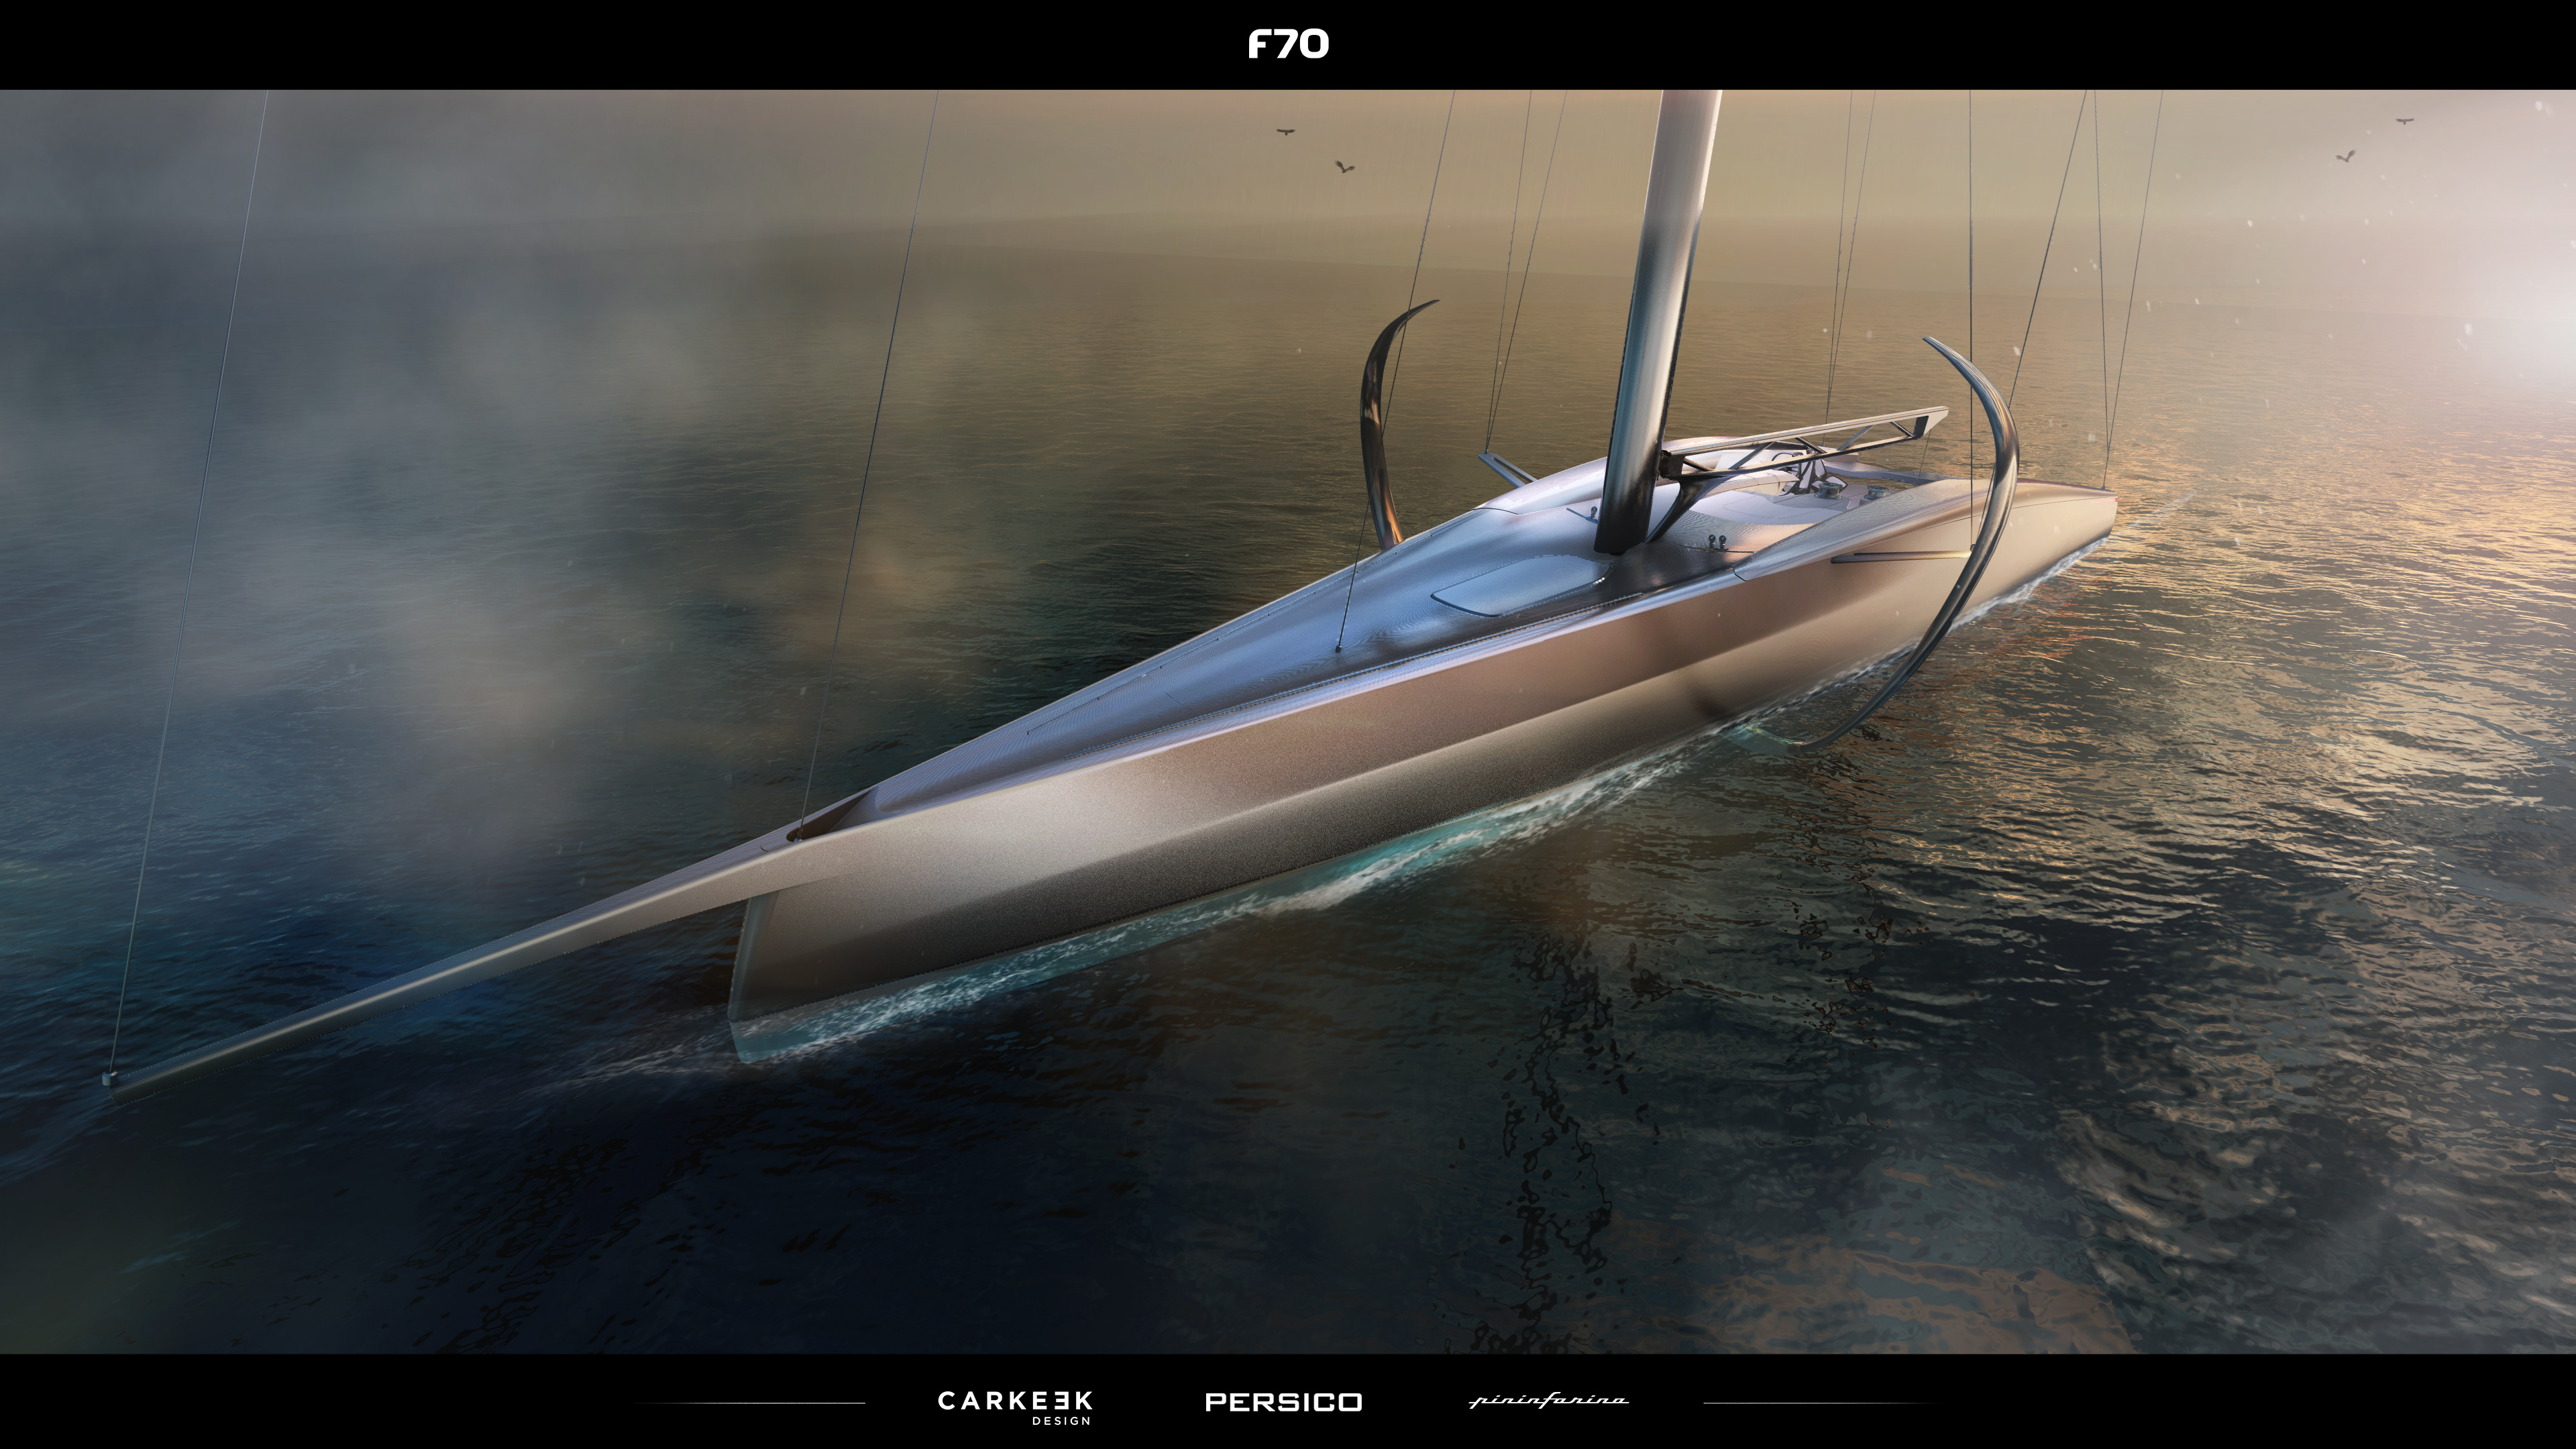 Pininfarina nautical is collaborating with Carkeek and Persico Marine on the Persico F70 project